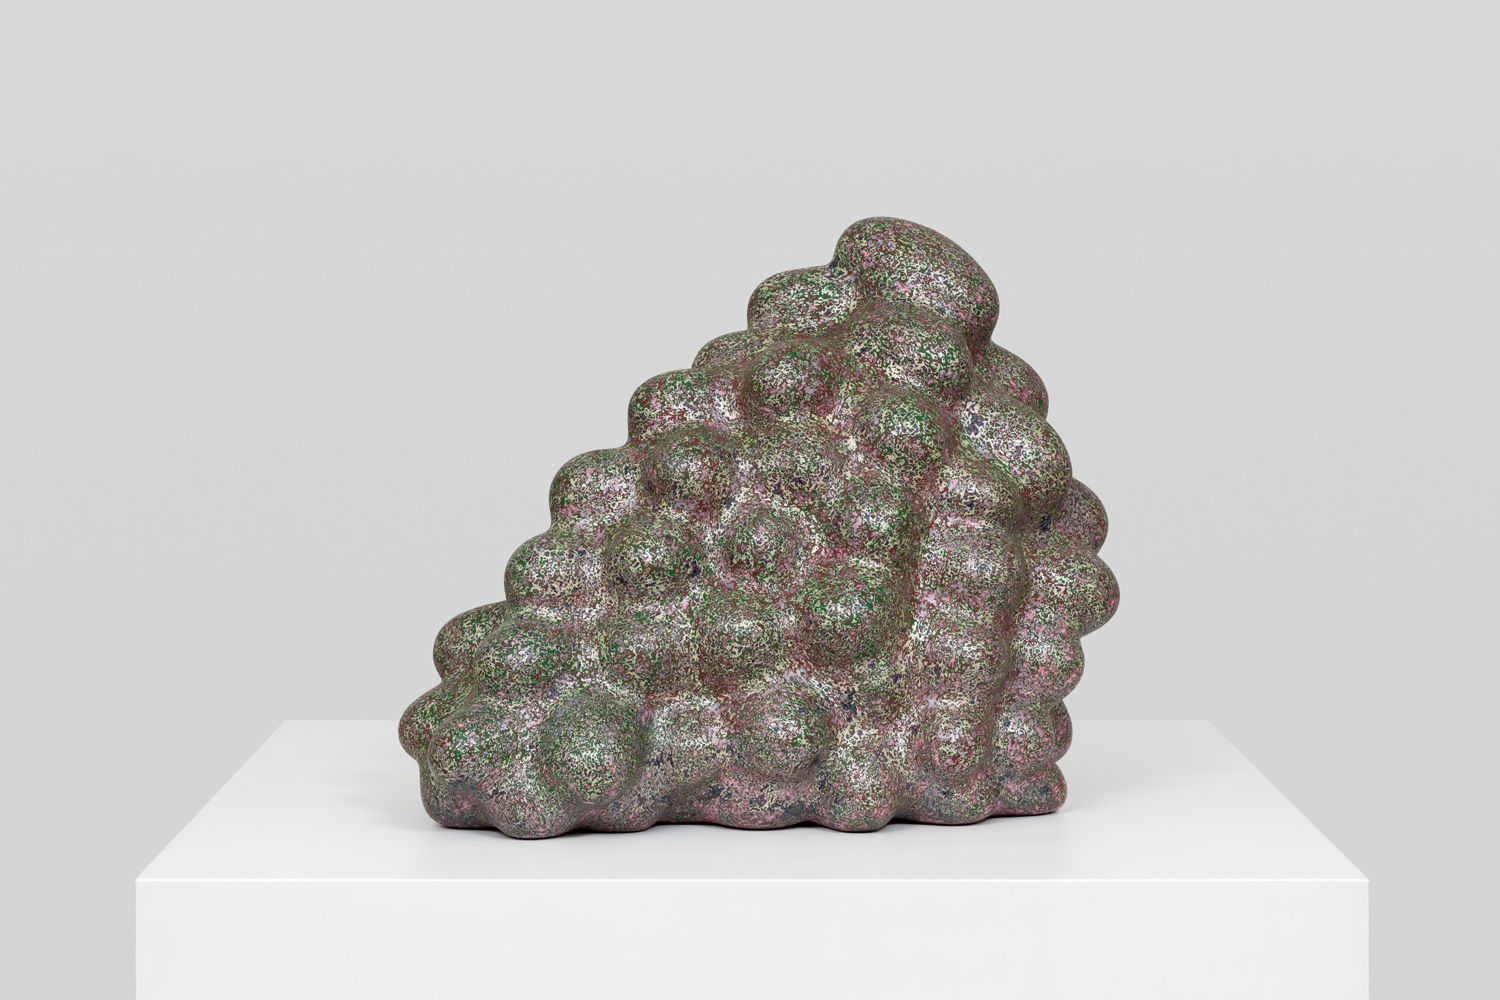 Ken Price, Geodesic Pile, 2006. fired and painted clay, 40.6 × 50.8 × 29.2 cm. Photo credit: HV-studio Courtesy of the Artist and Xavier Hufkens, Brussels